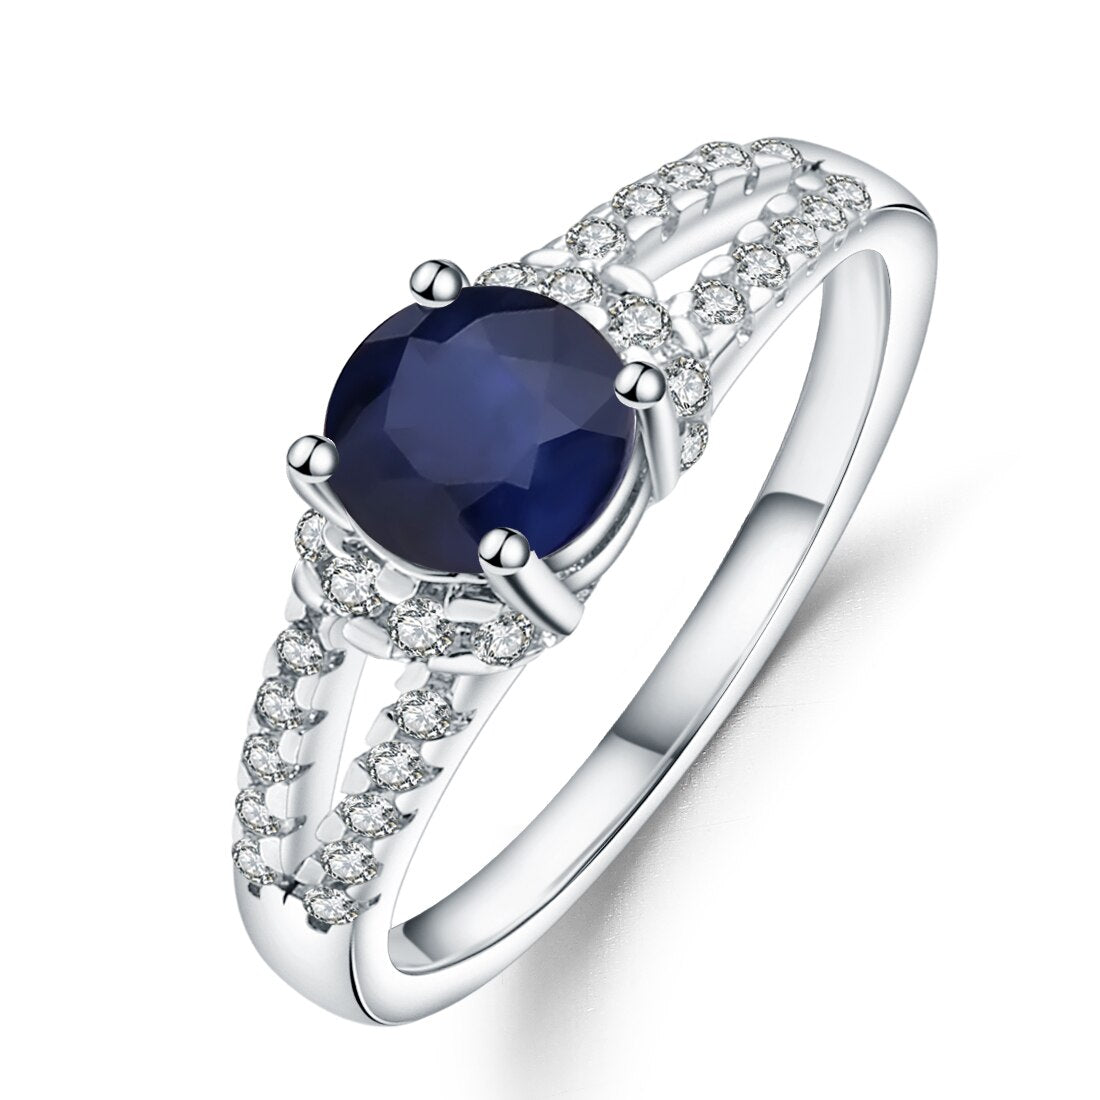 GEM&#39;S BALLET Pure 925 Sterling Silver Vintage Rings Round 1.31Ct Natural Blue Sapphire Gemstone Ring for Women Wedding Jewelry Blue Sapphire|925 Sterling Silver